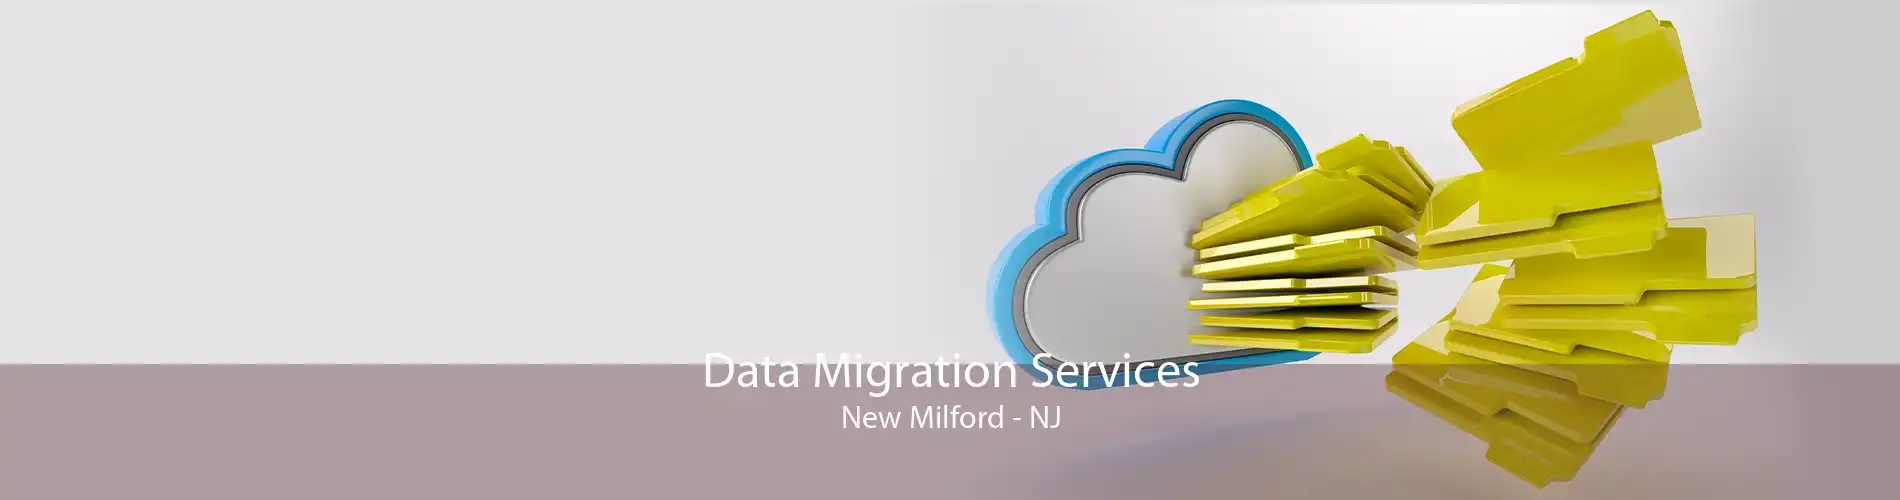 Data Migration Services New Milford - NJ